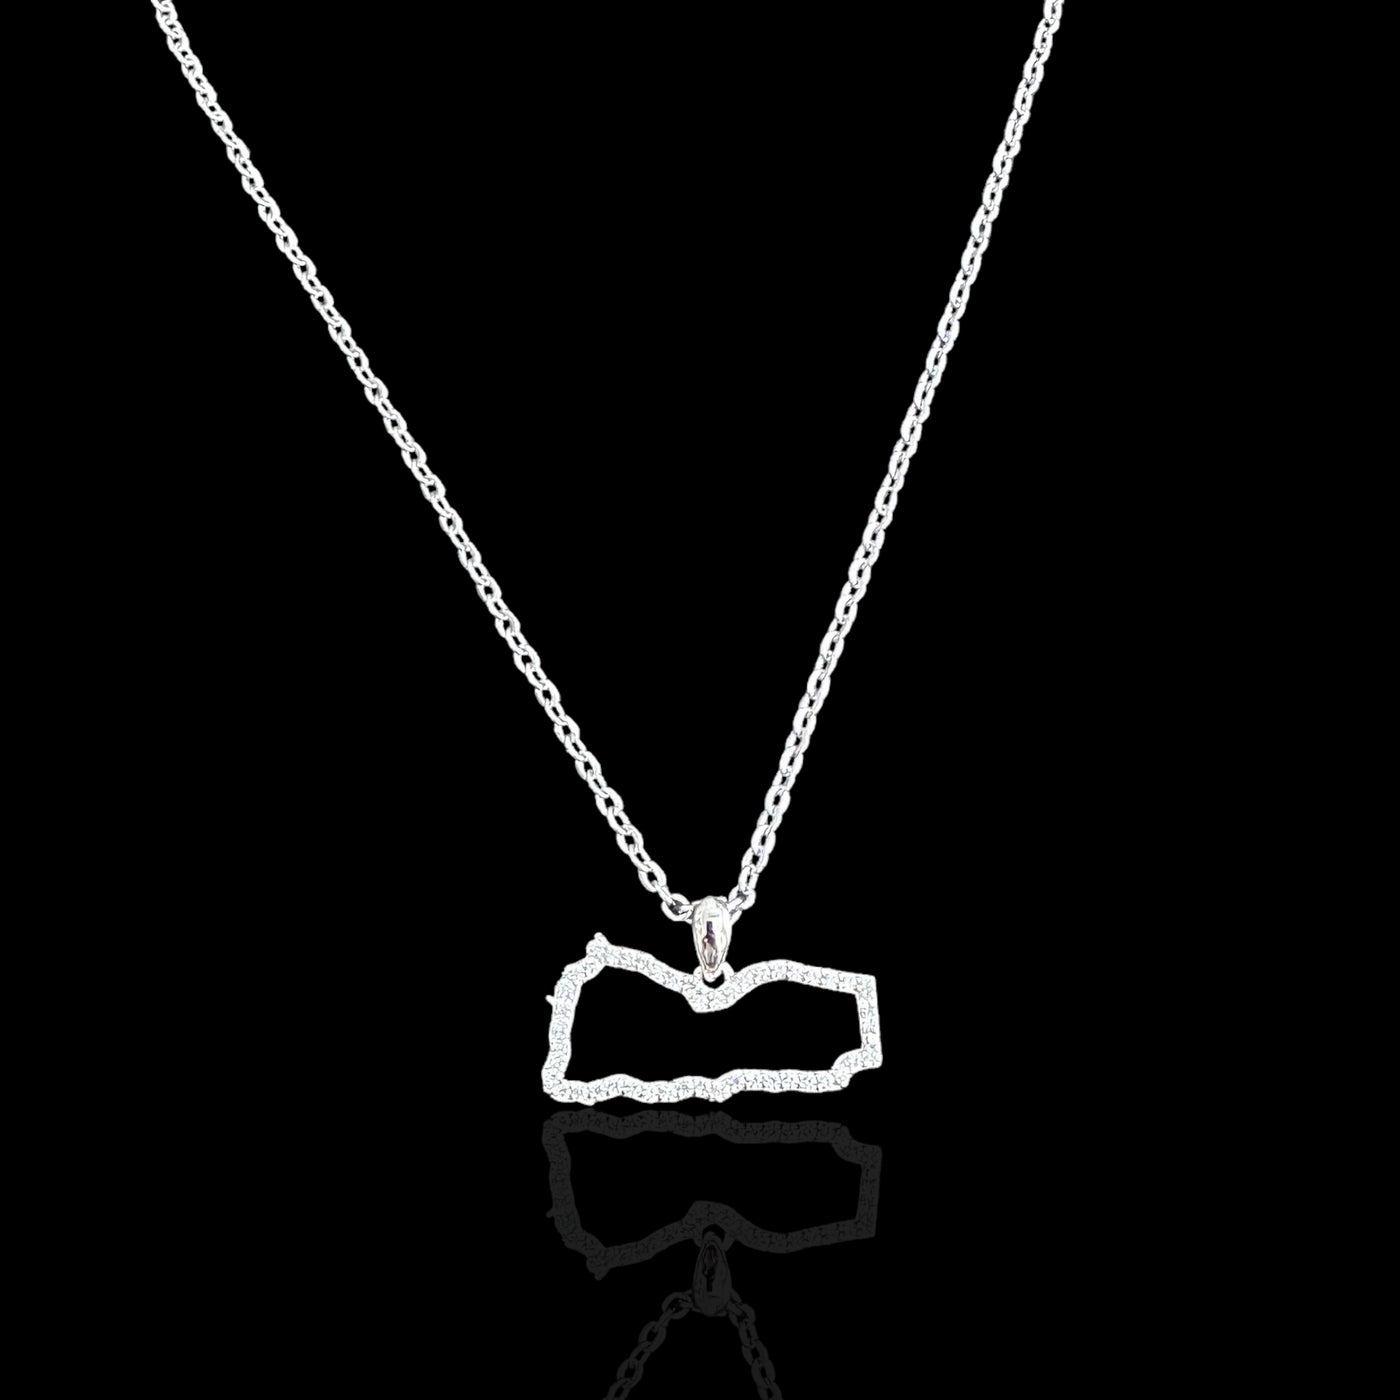 Sterling Silver Yemen Map CZ Outline Necklace - Available in 3 Colors